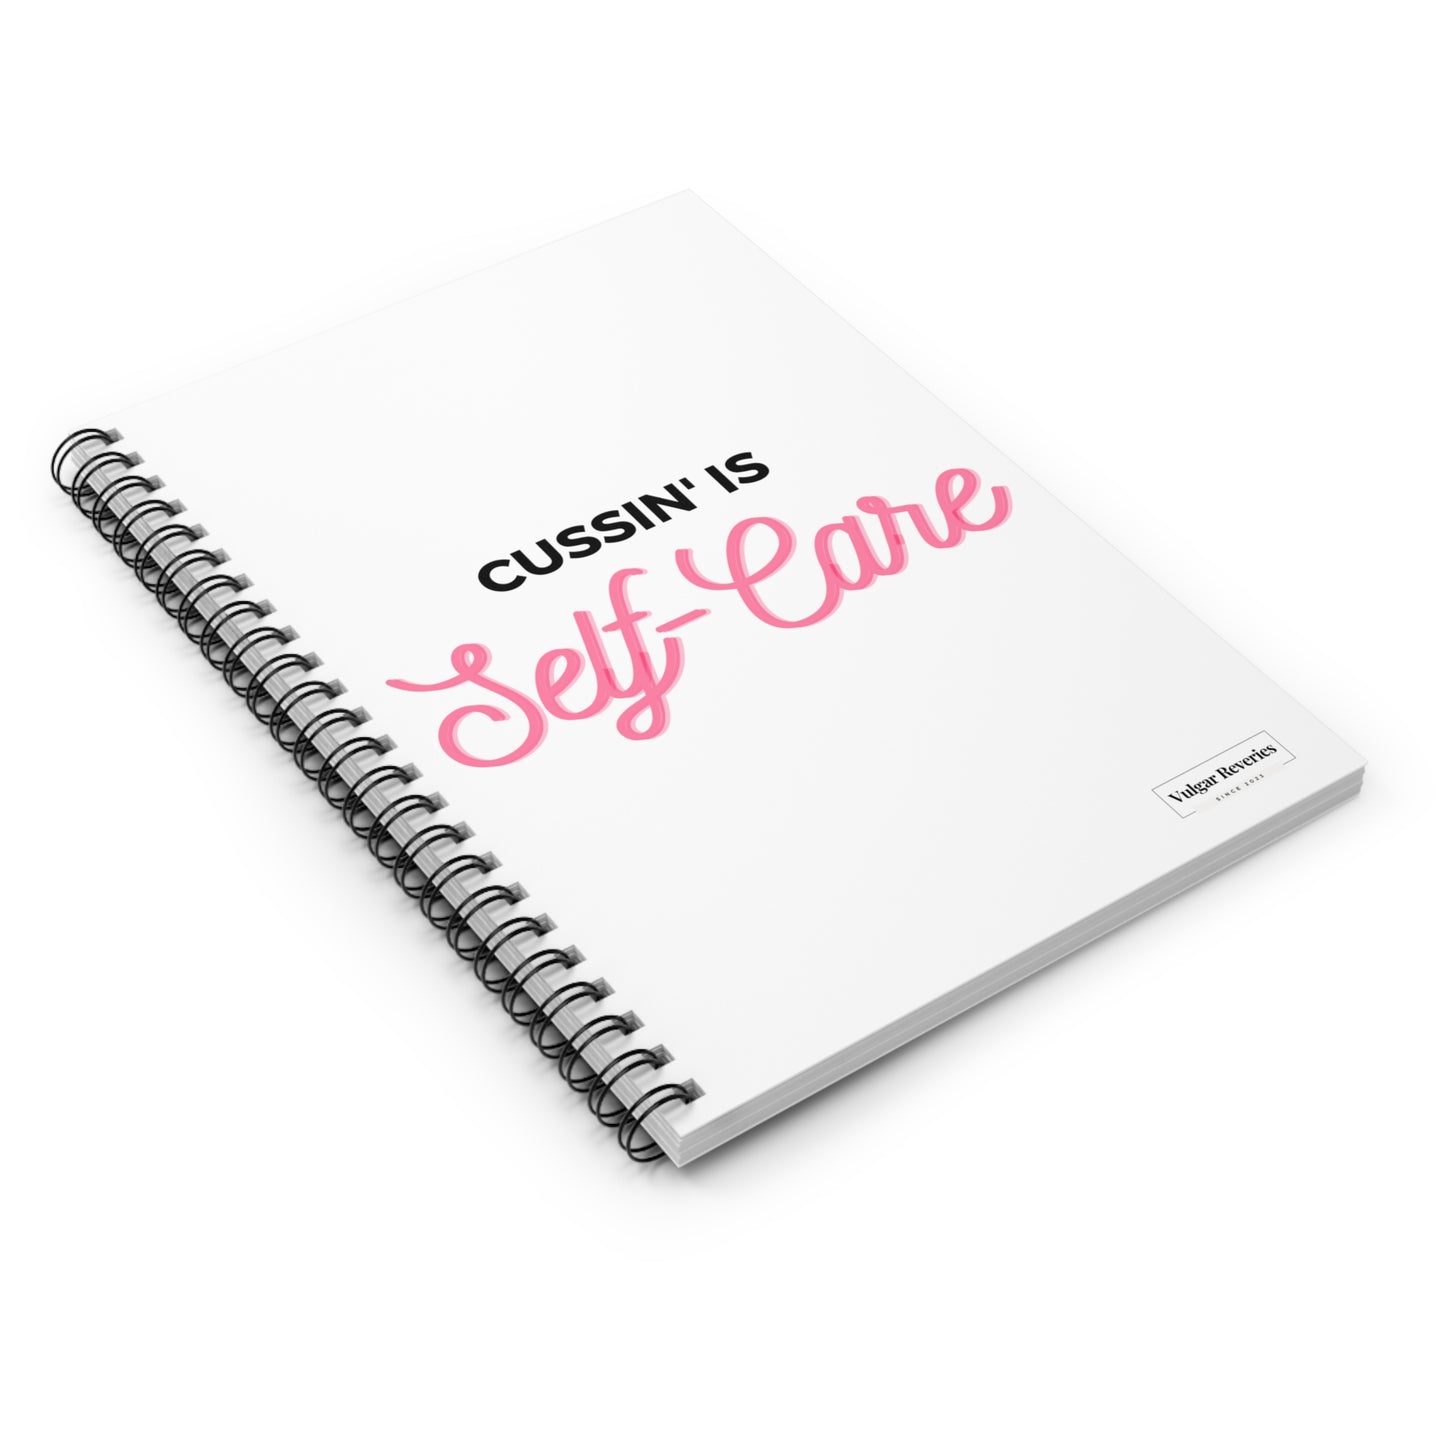 Cussing is Self-Care - Spiral Notebook - Ruled Line